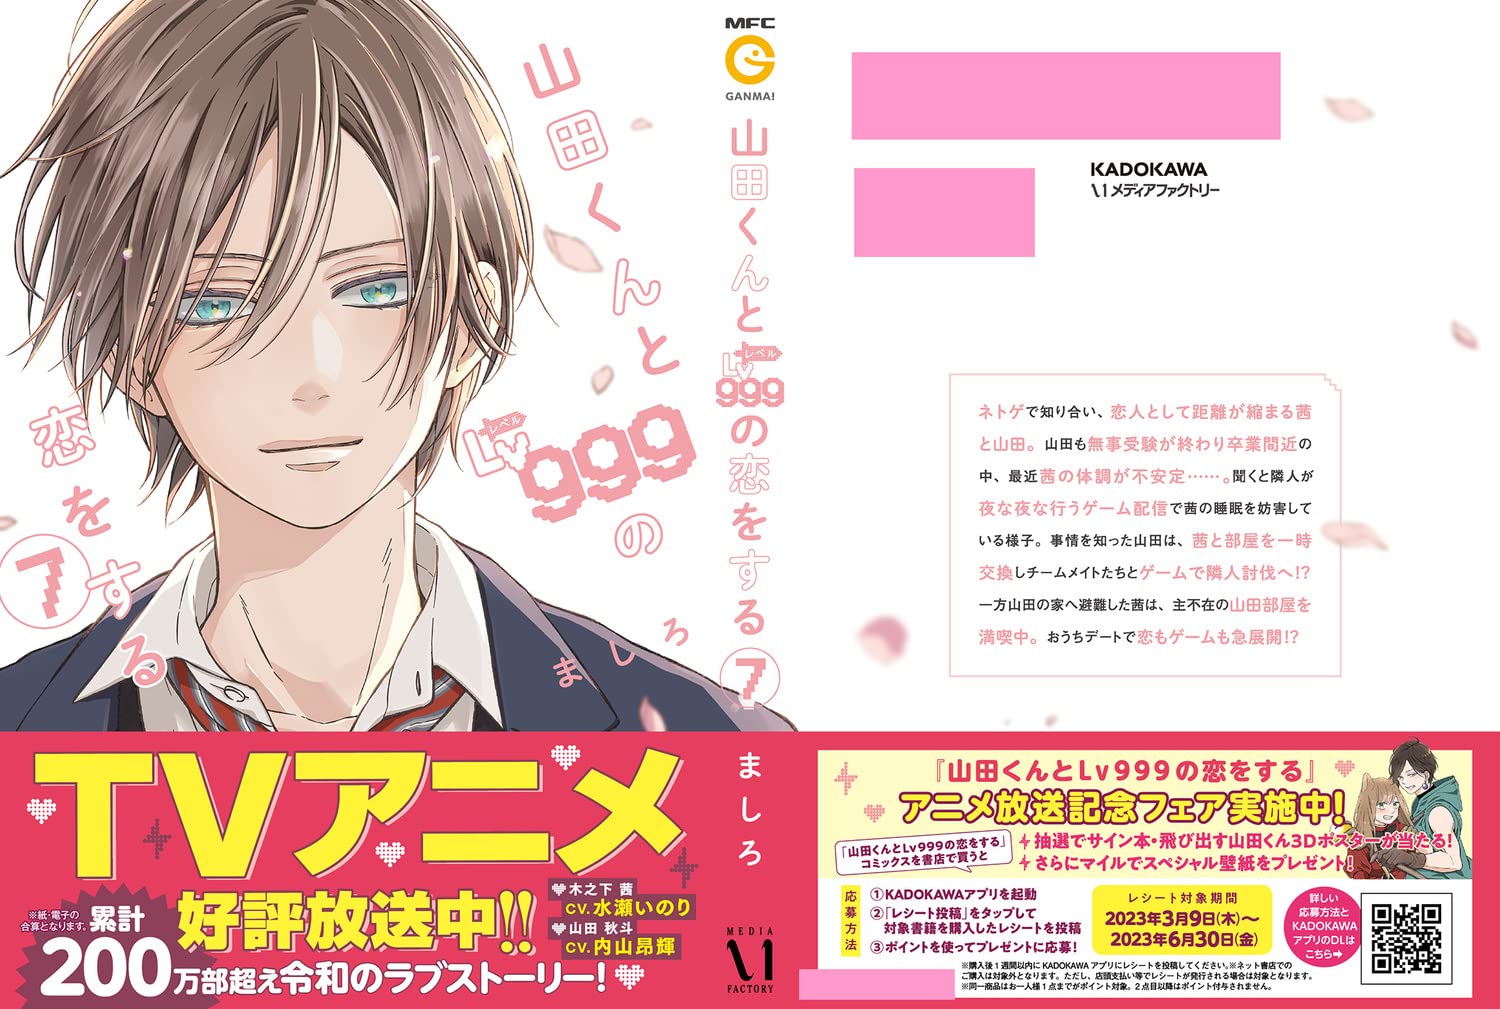 Heart on X: My Love Story with Yamada-kun at Lv999 Blu-ray DVD Volume 4  Cover!  / X